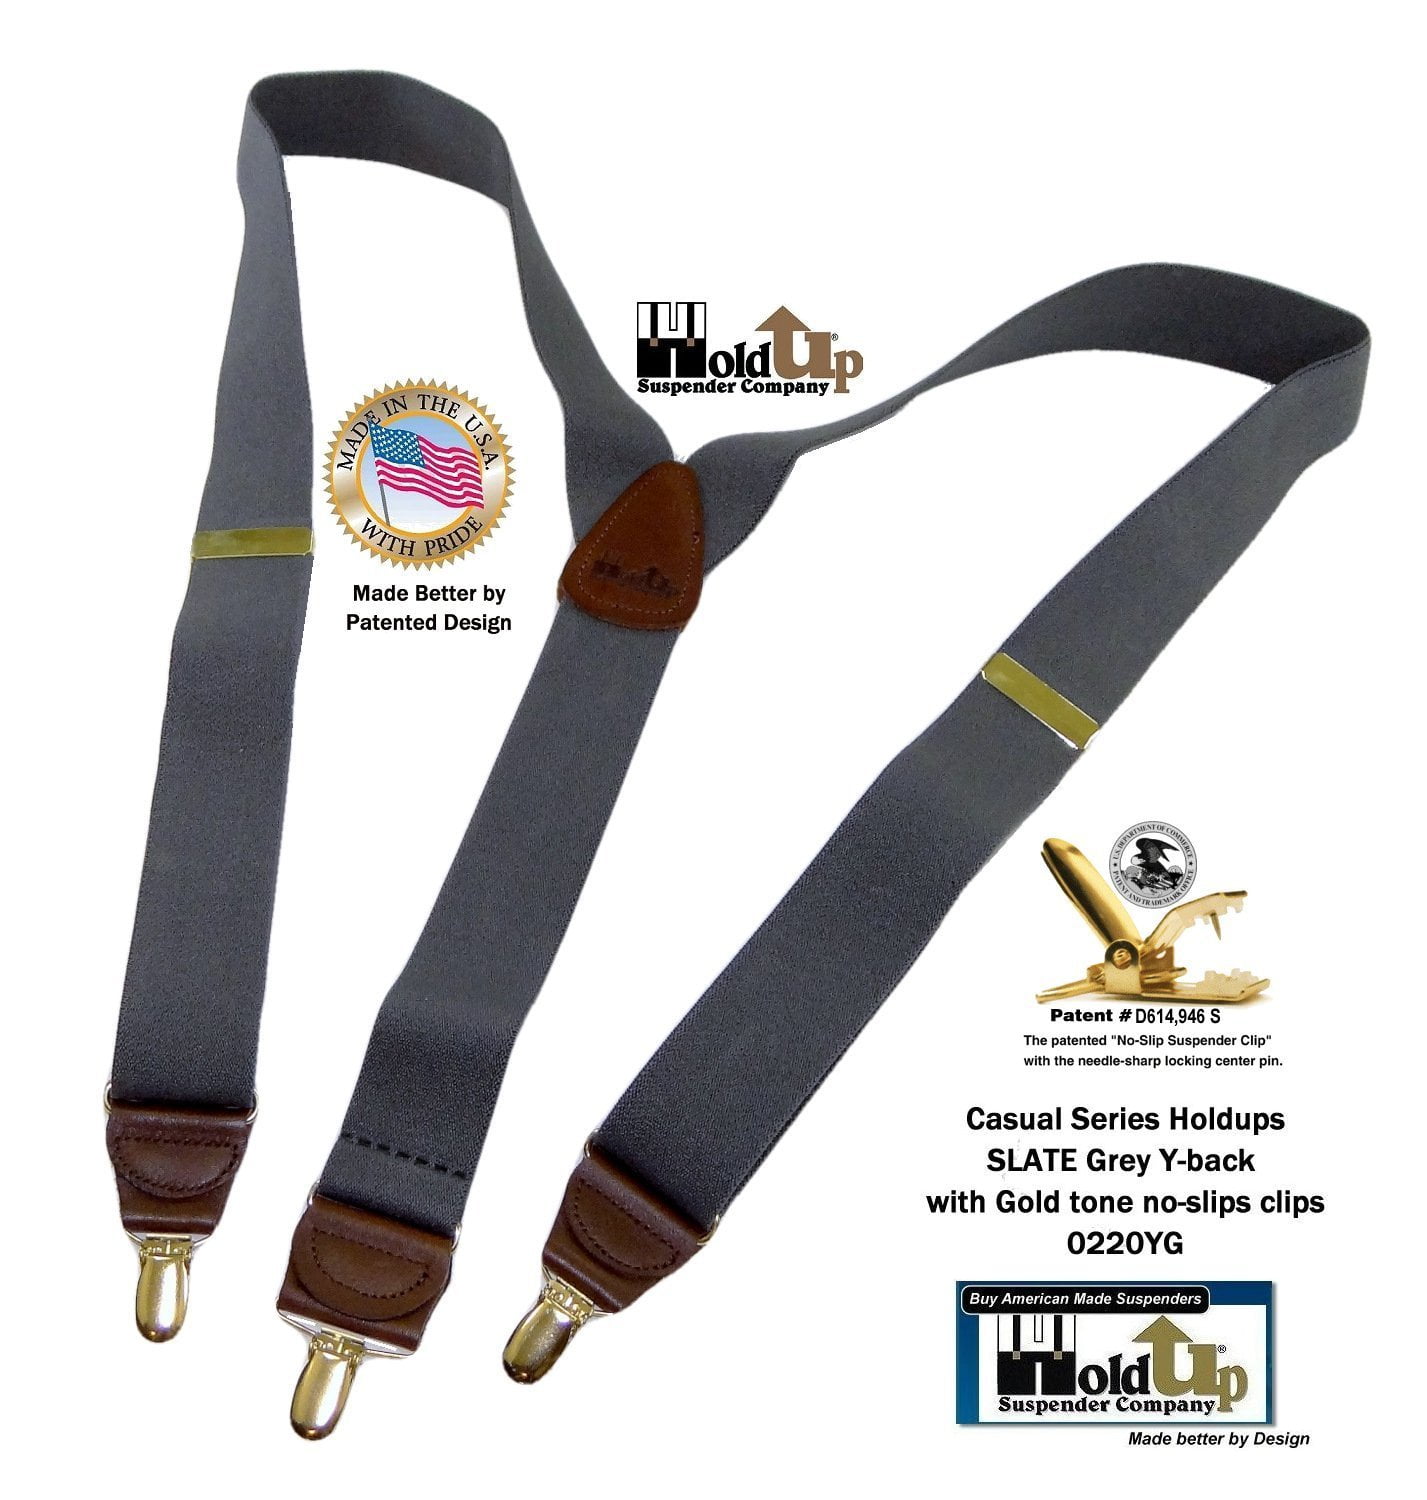 Holdup Suspender Company Slate Grey Mens Y-back Clip-on Suspenders in 1 1/2 width featuring Patented No-slip Gold-Tone Clips Holdup Suspender Company Inc 0220YG